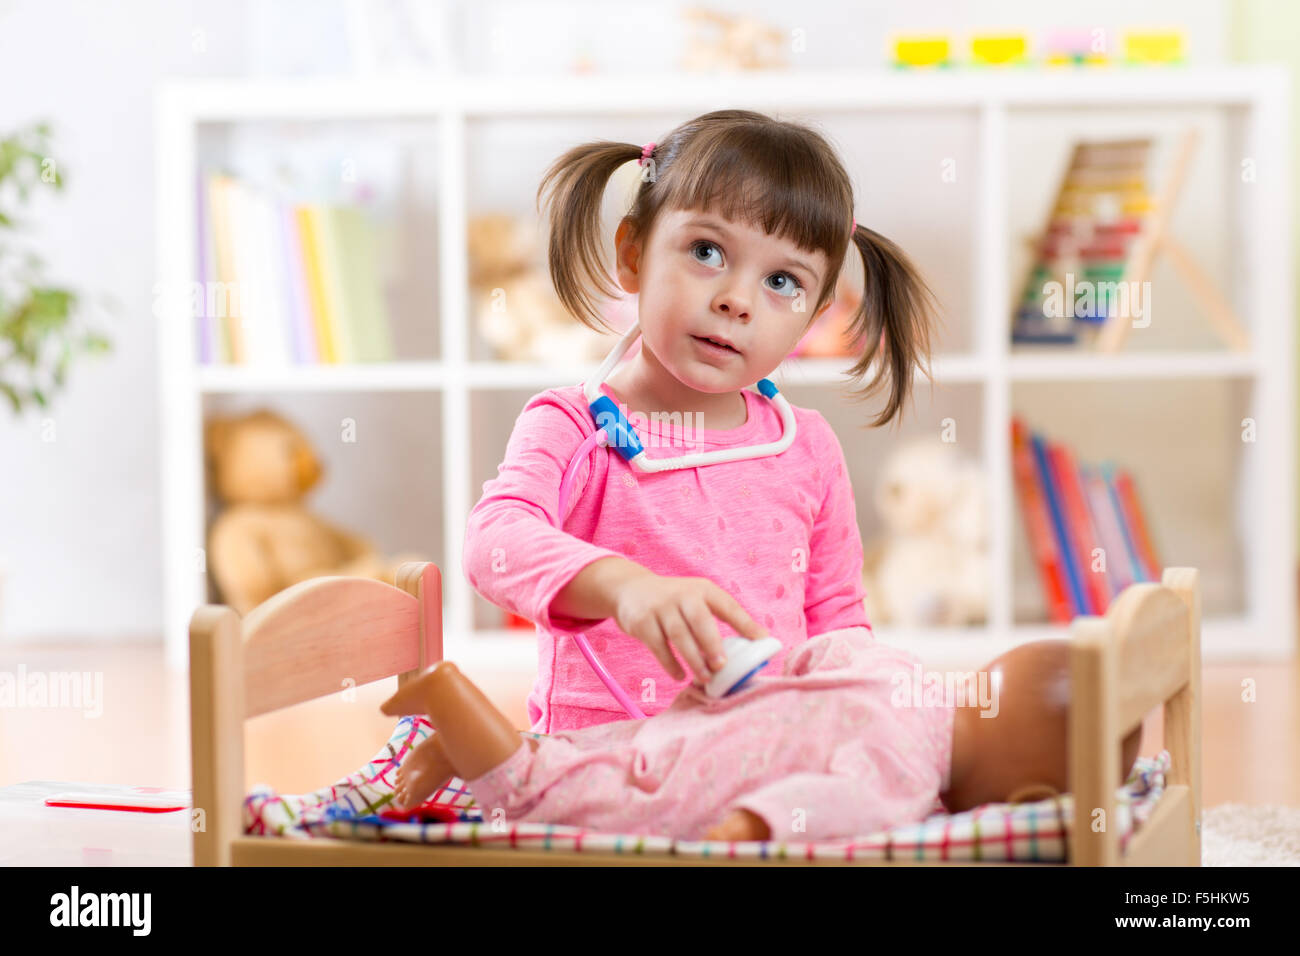 Child girl plays doctor examining baby doll patient with toy stethoscope Stock Photo